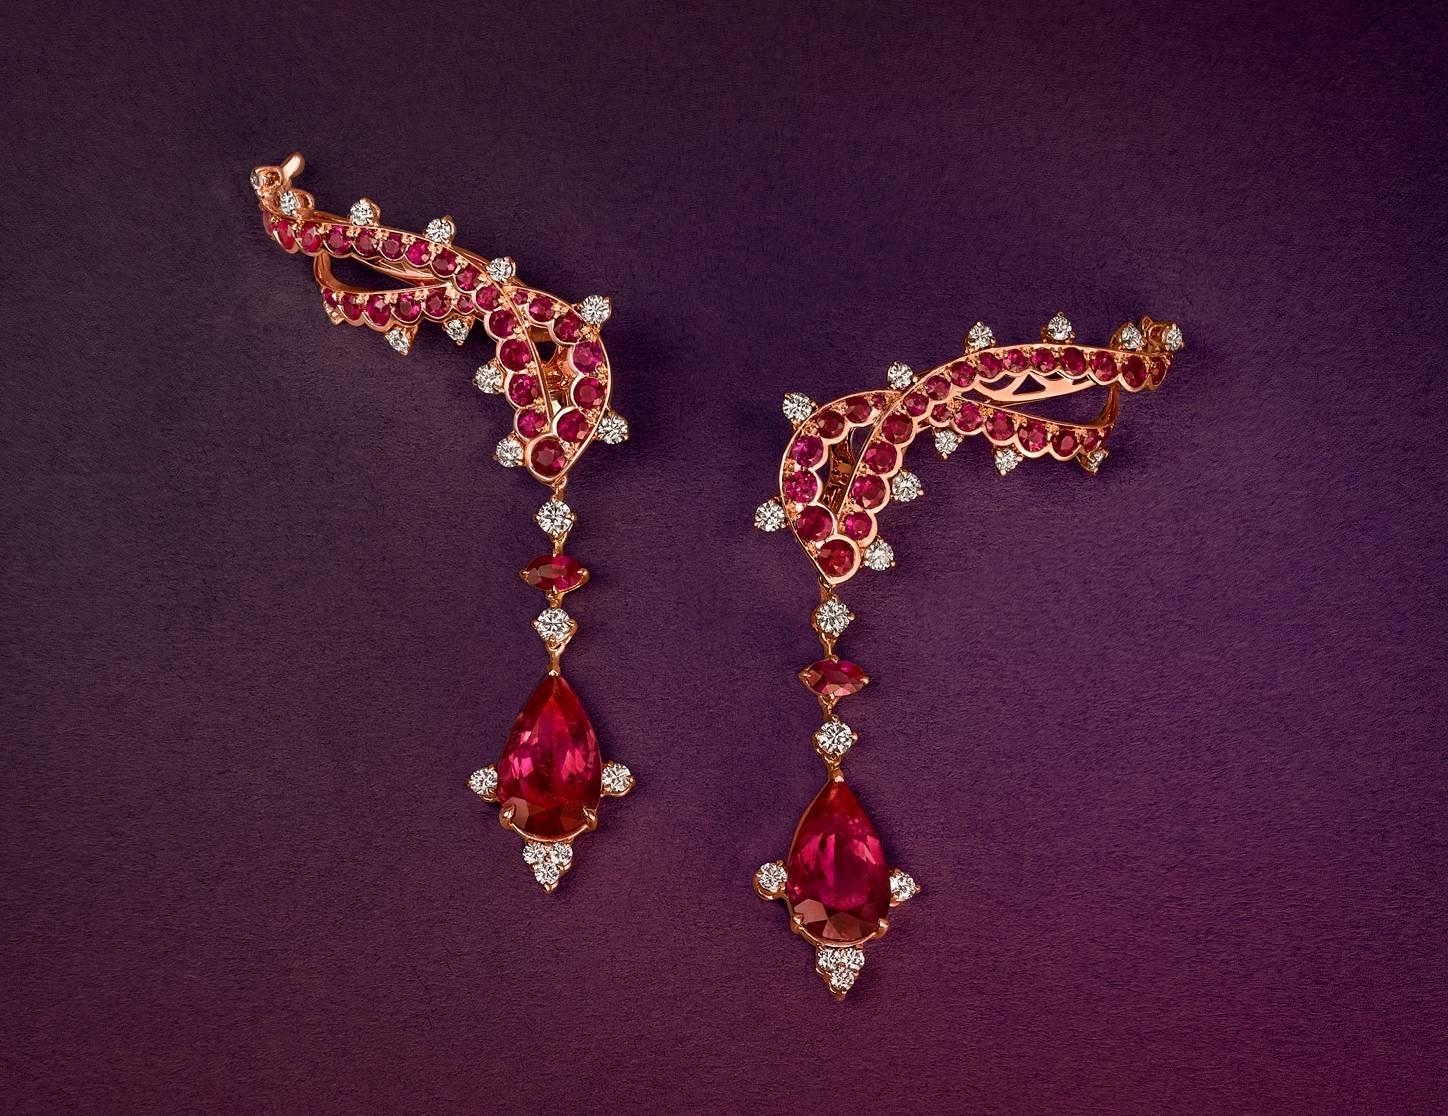 Pear Cut Rose Gold, White Diamonds, Mozambican Rubies and Rubellite Ear Climbers Earrings